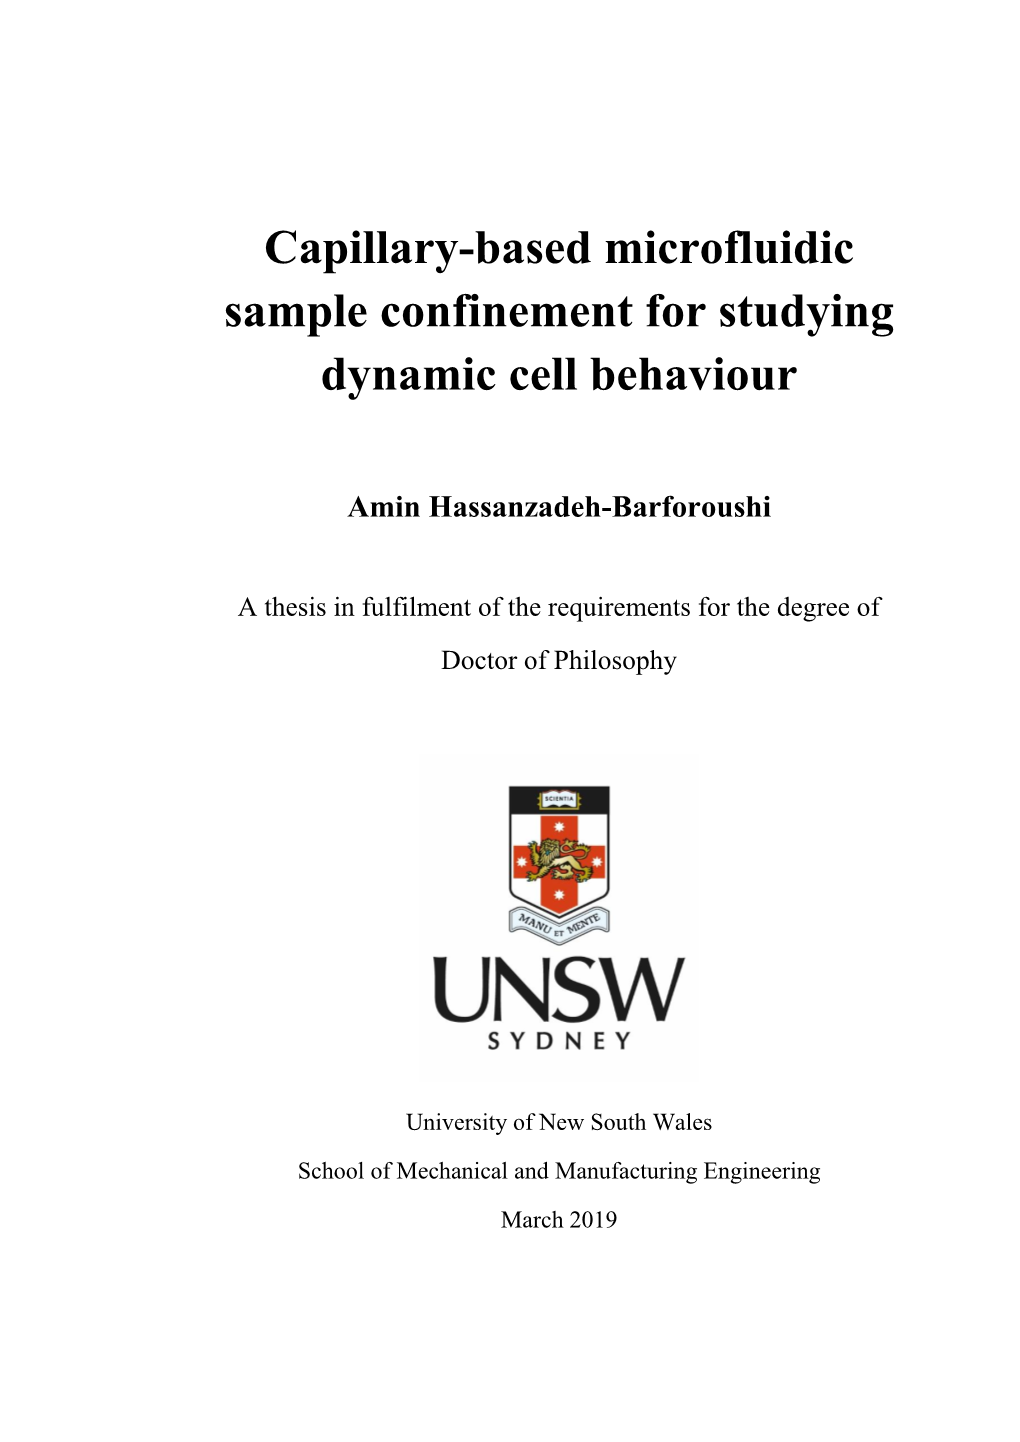 Capillary-Based Microfluidic Sample Confinement for Studying Dynamic Cell Behaviour